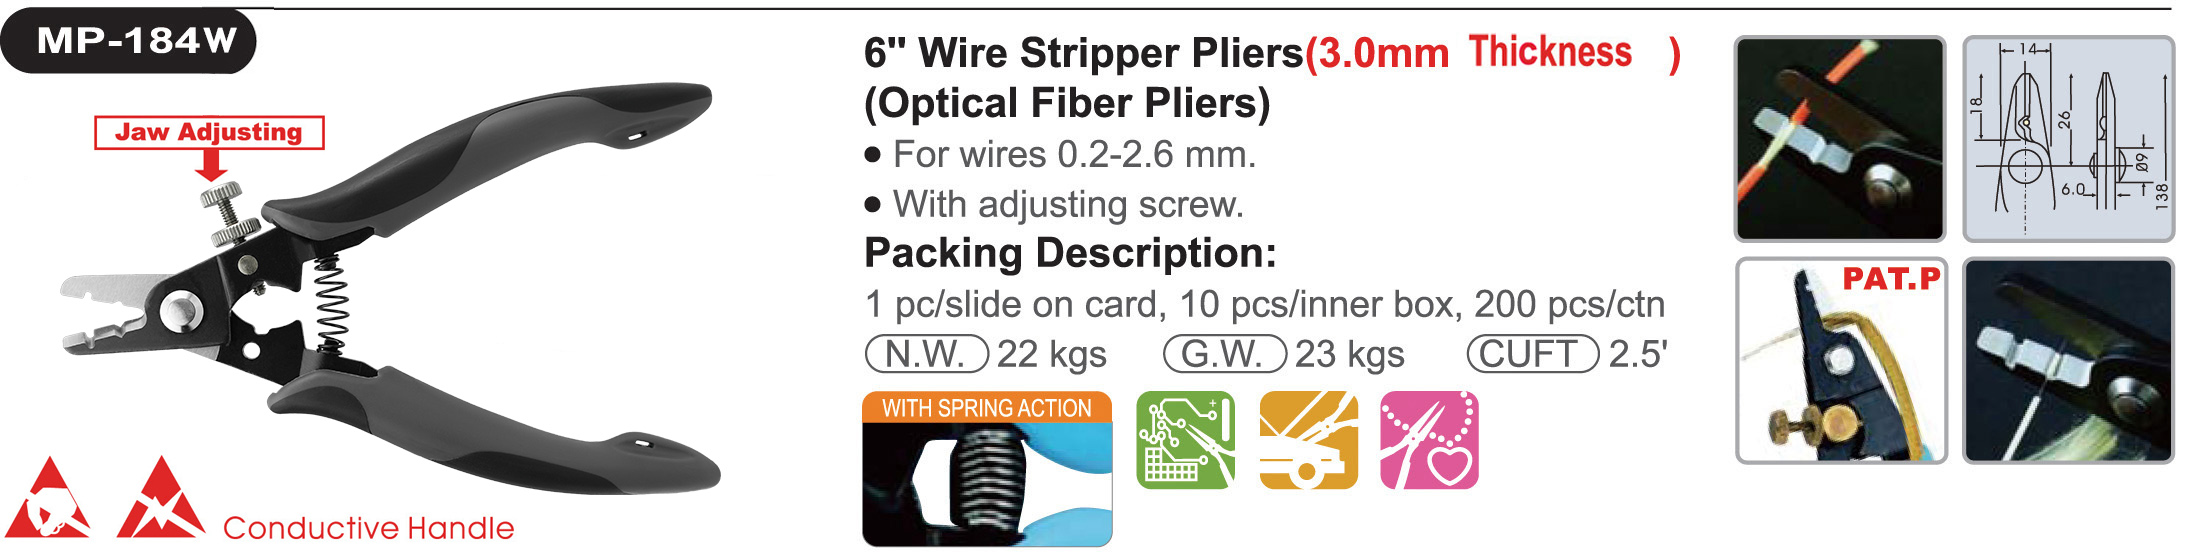 proimages/product/pliers/wire_strippers/Wire_Stripper_for_fibre_optics/MP-184W/MP-184W.jpg